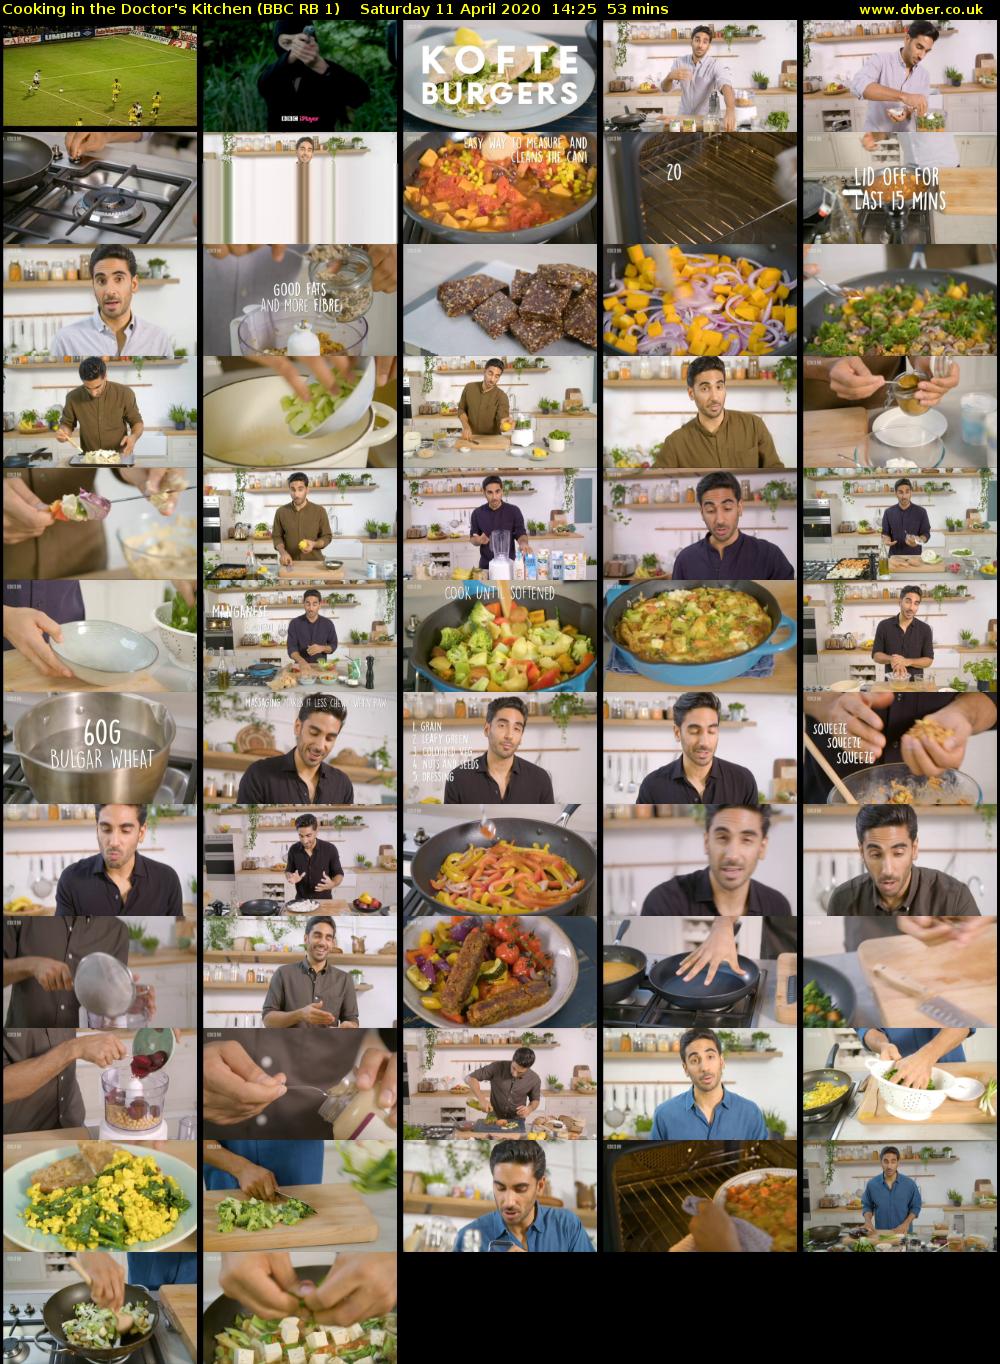 Cooking in the Doctor's Kitchen (BBC RB 1) Saturday 11 April 2020 14:25 - 15:18